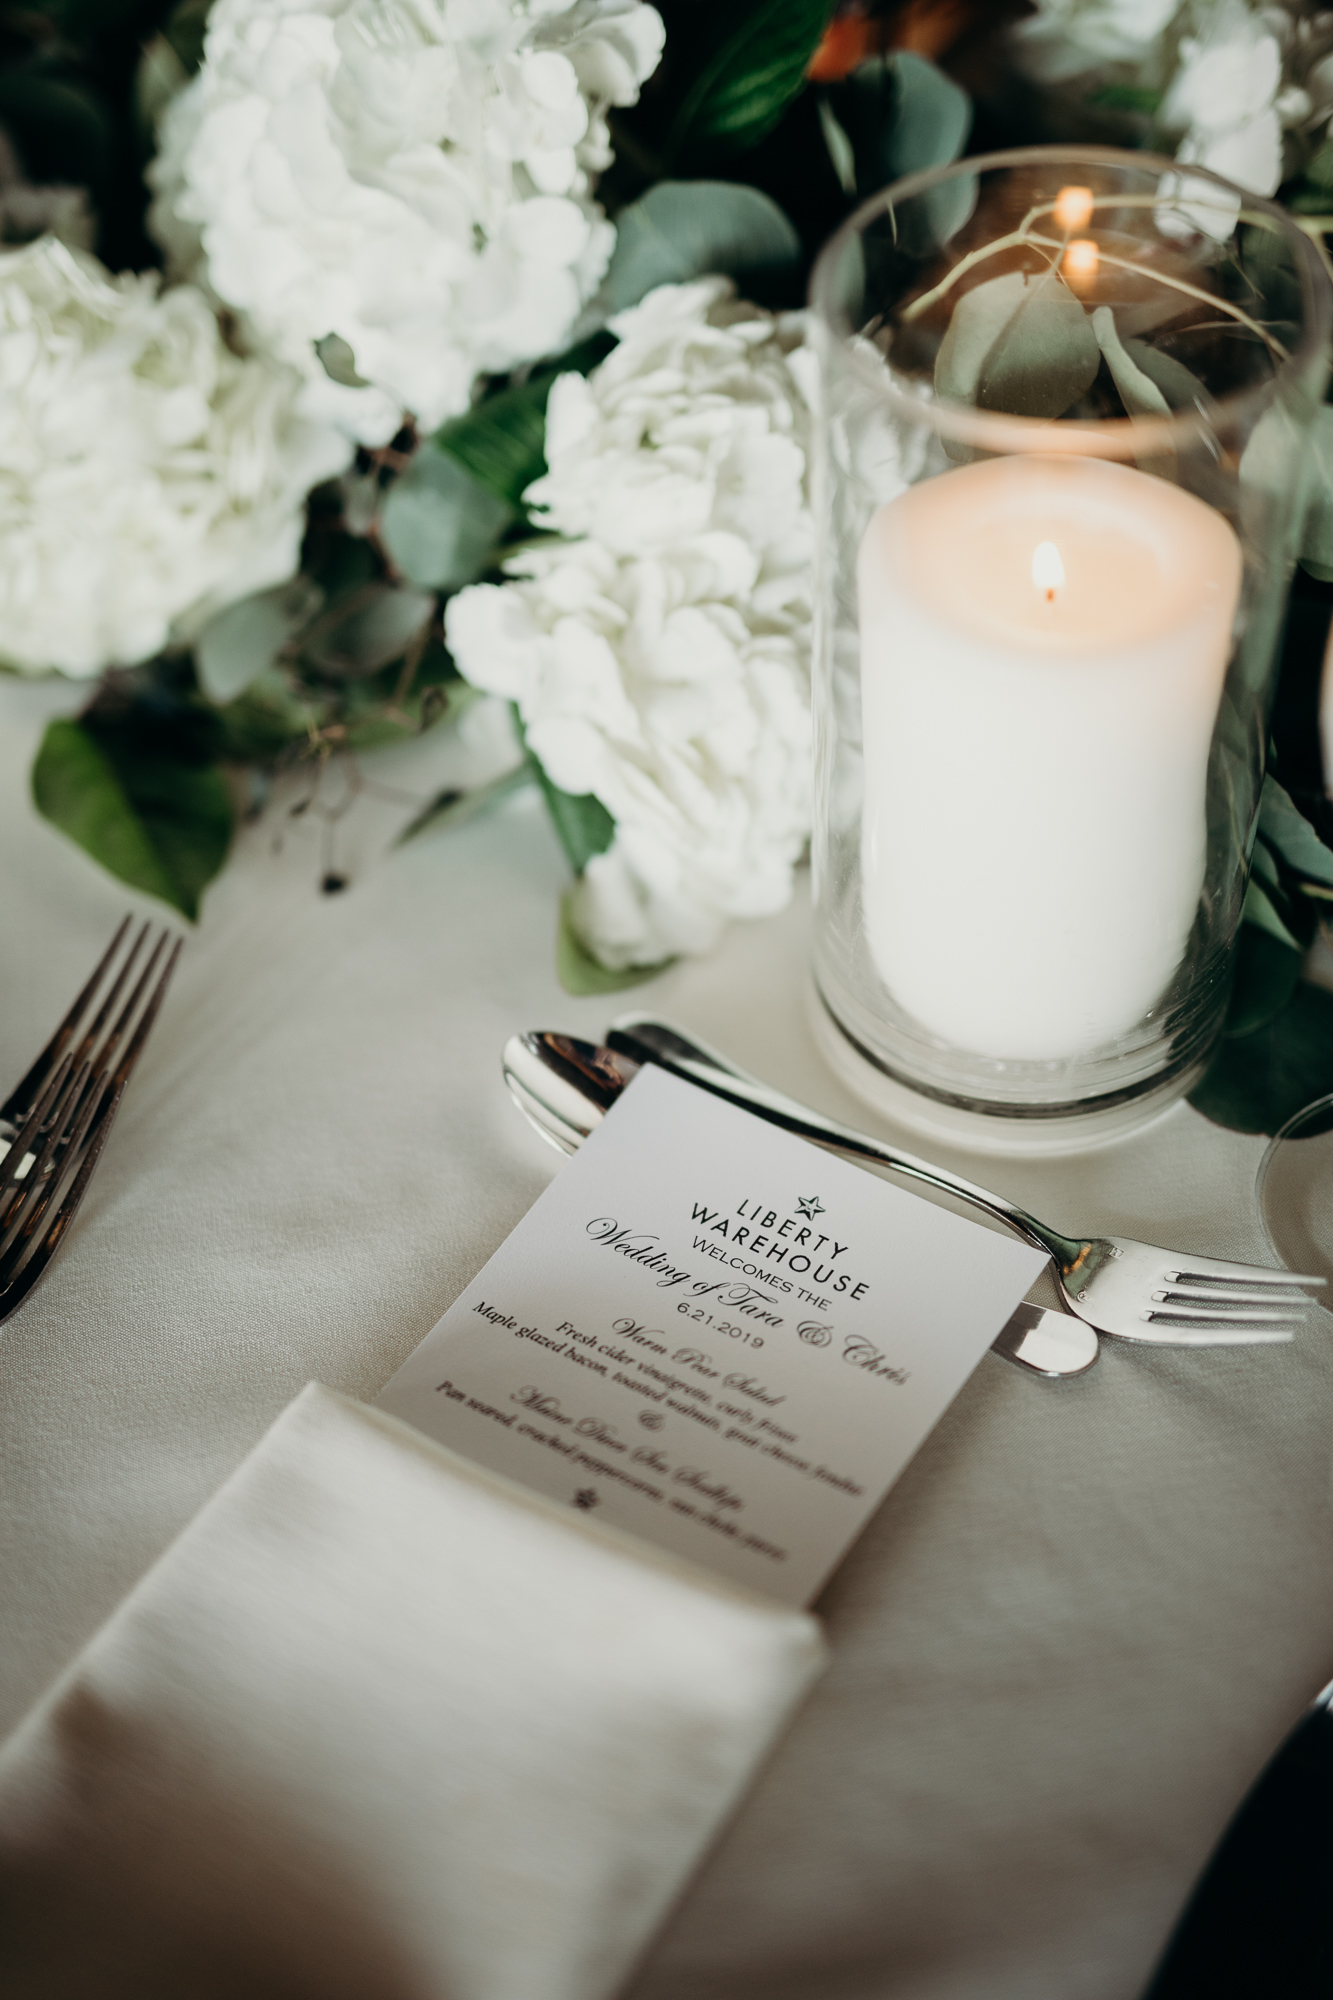 wedding reception details at liberty warehouse in brooklyn, new york city